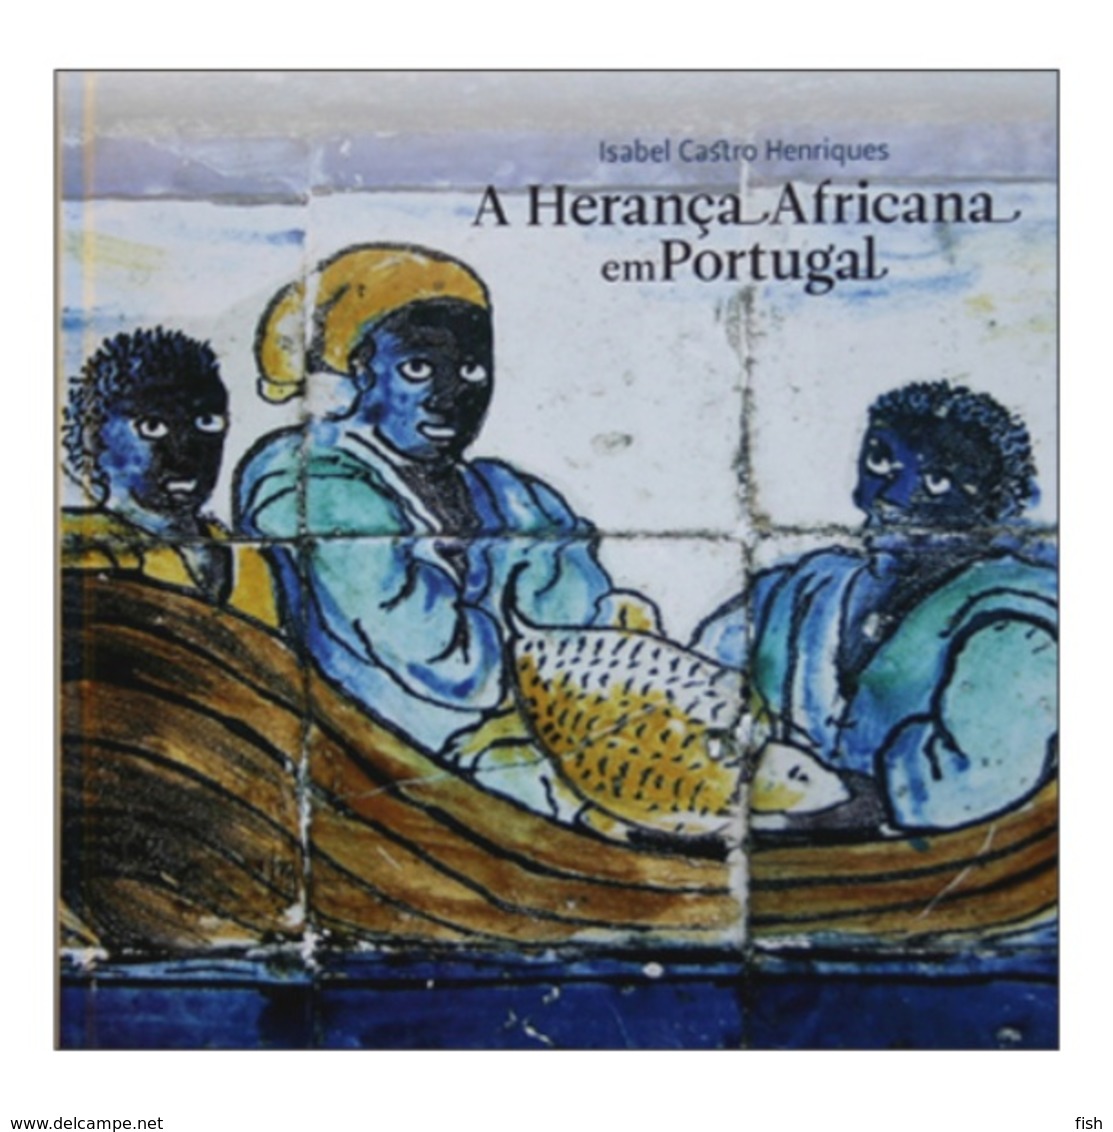 Portugal ** & CTT, Thematic Book With Stamps, African Heritage In Portugal 2009 (20190) - Livre De L'année